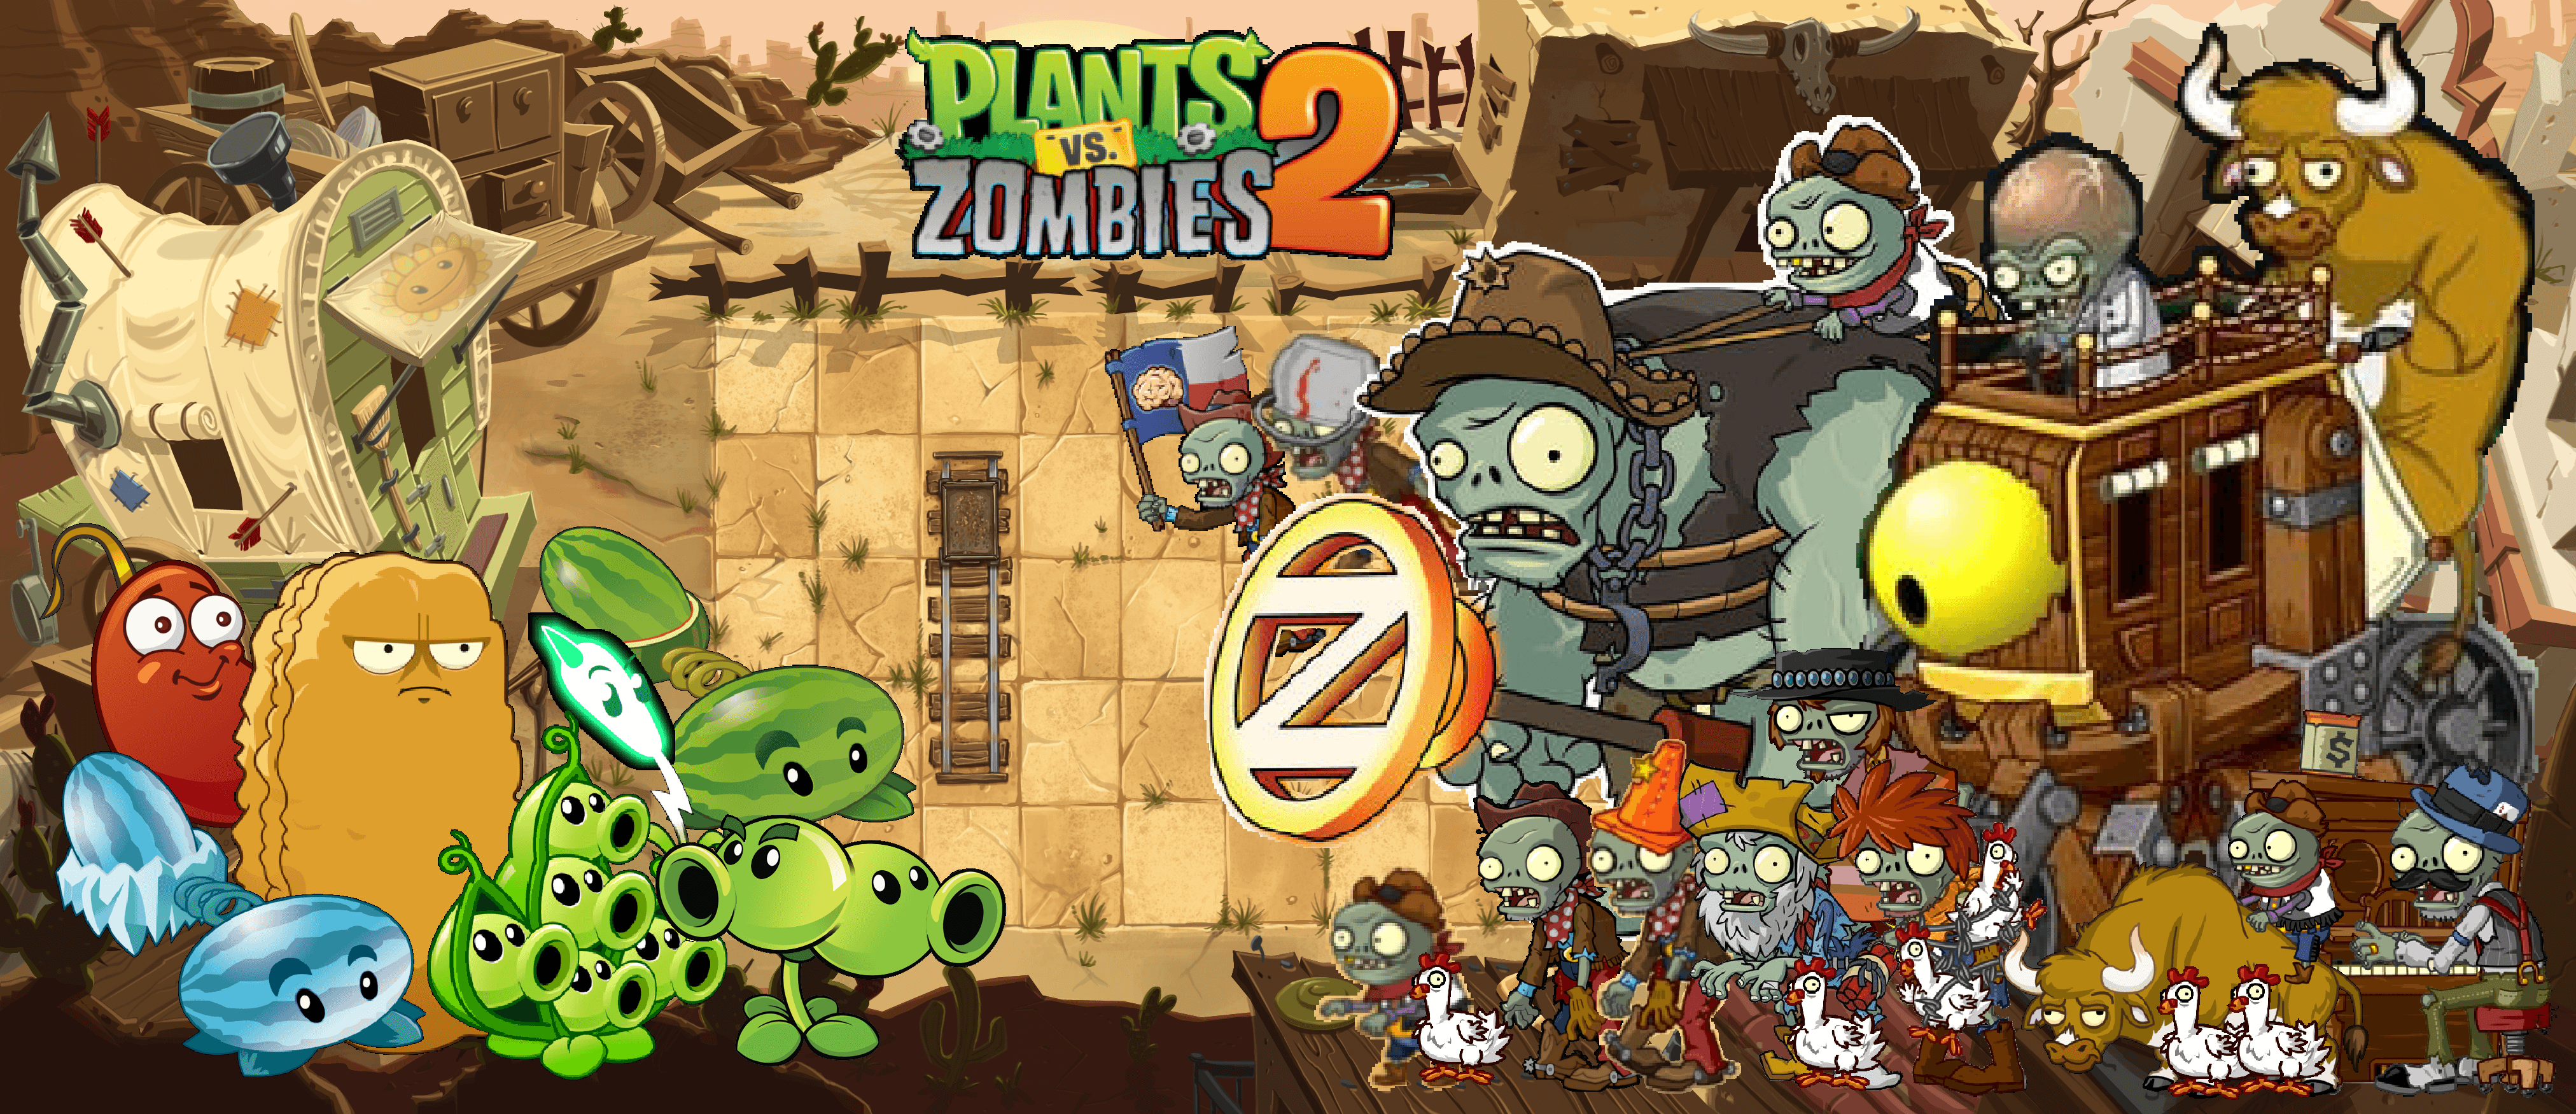 Plants vs Zombies 2 World Wallpapers by PhotographerFerd.